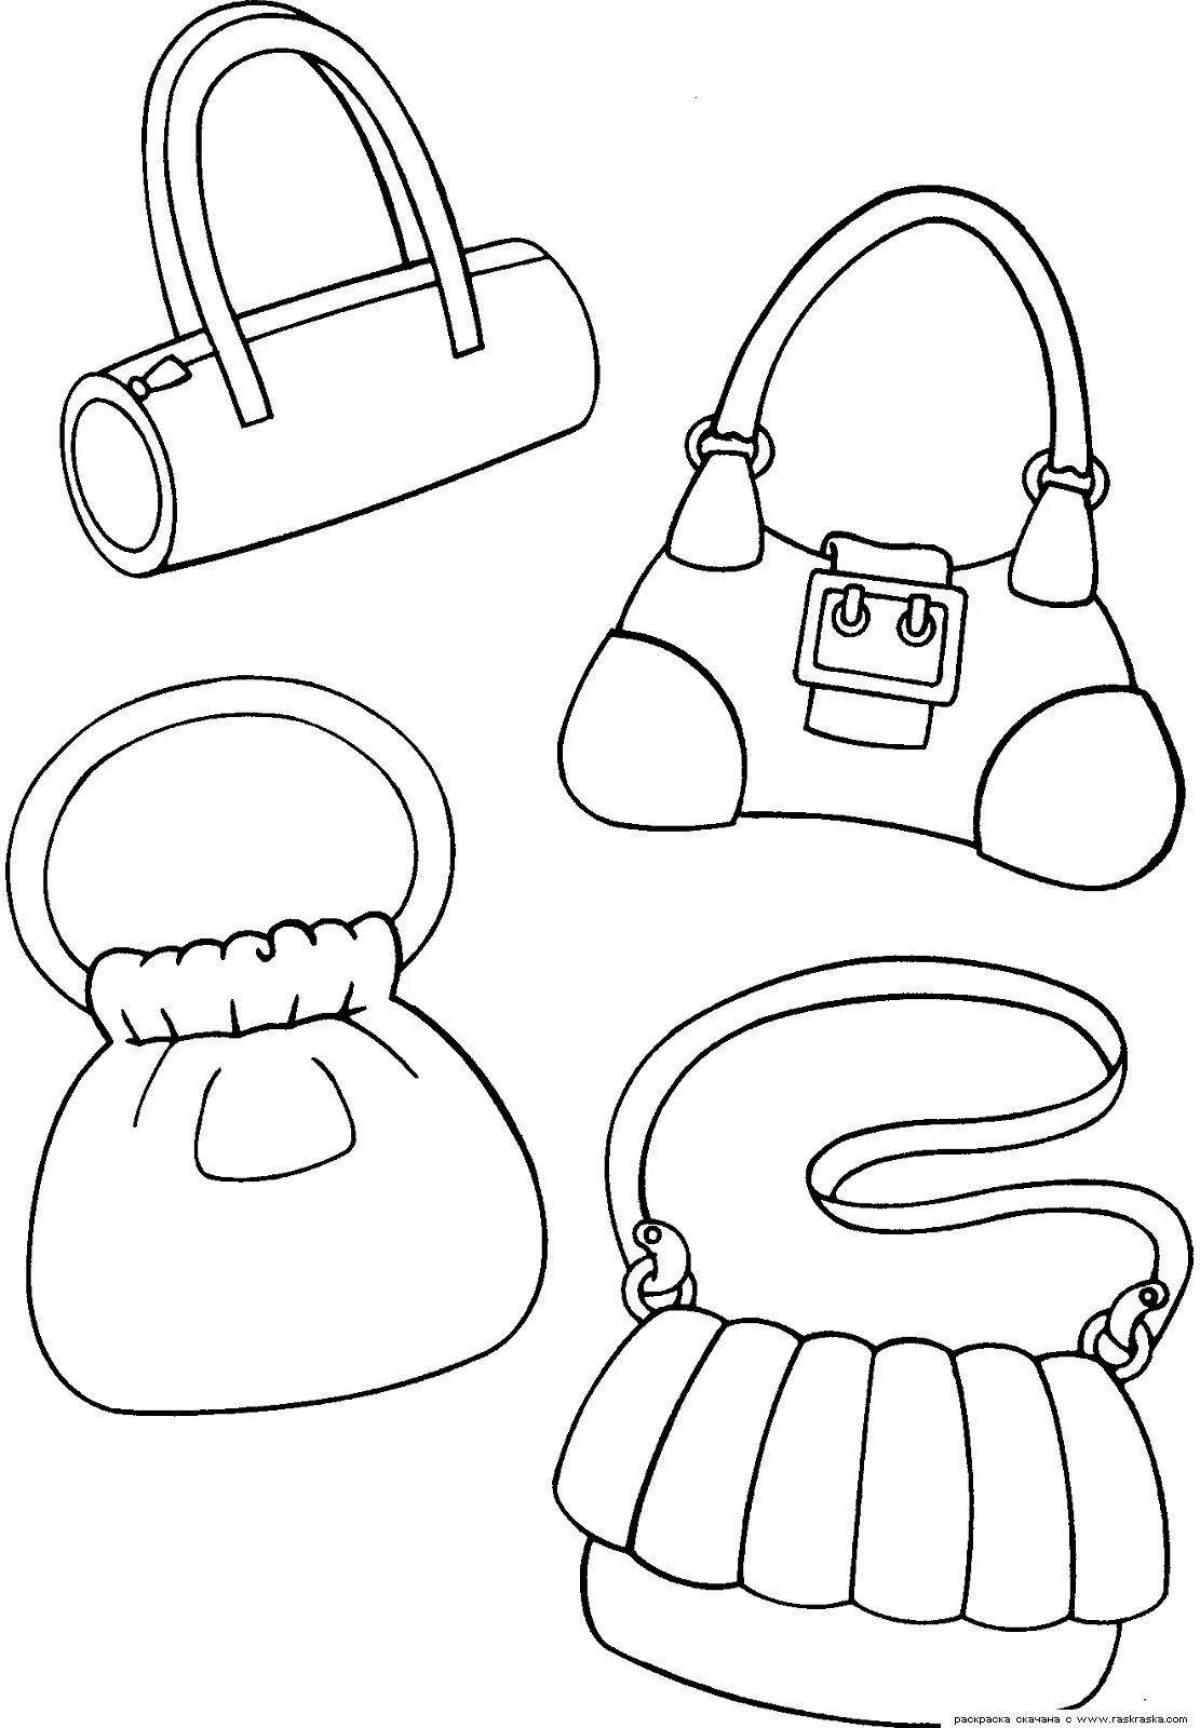 Fancy coloring pages for girls